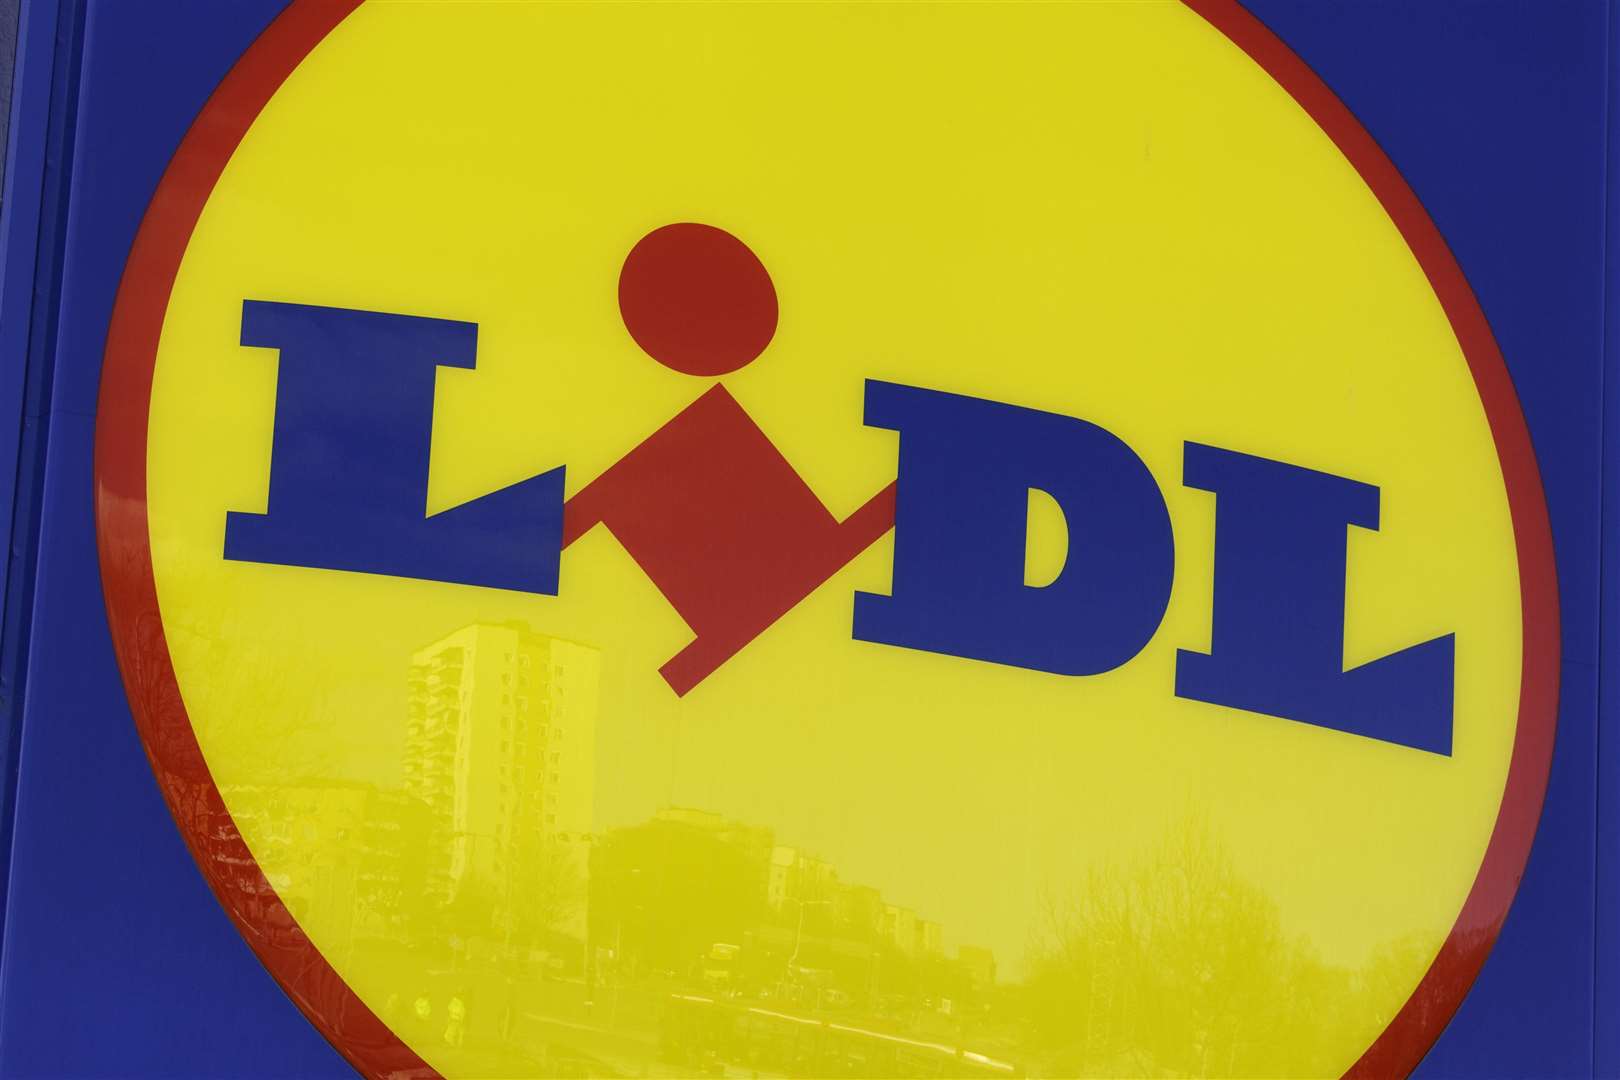 There's no rationing enforced at Lidl